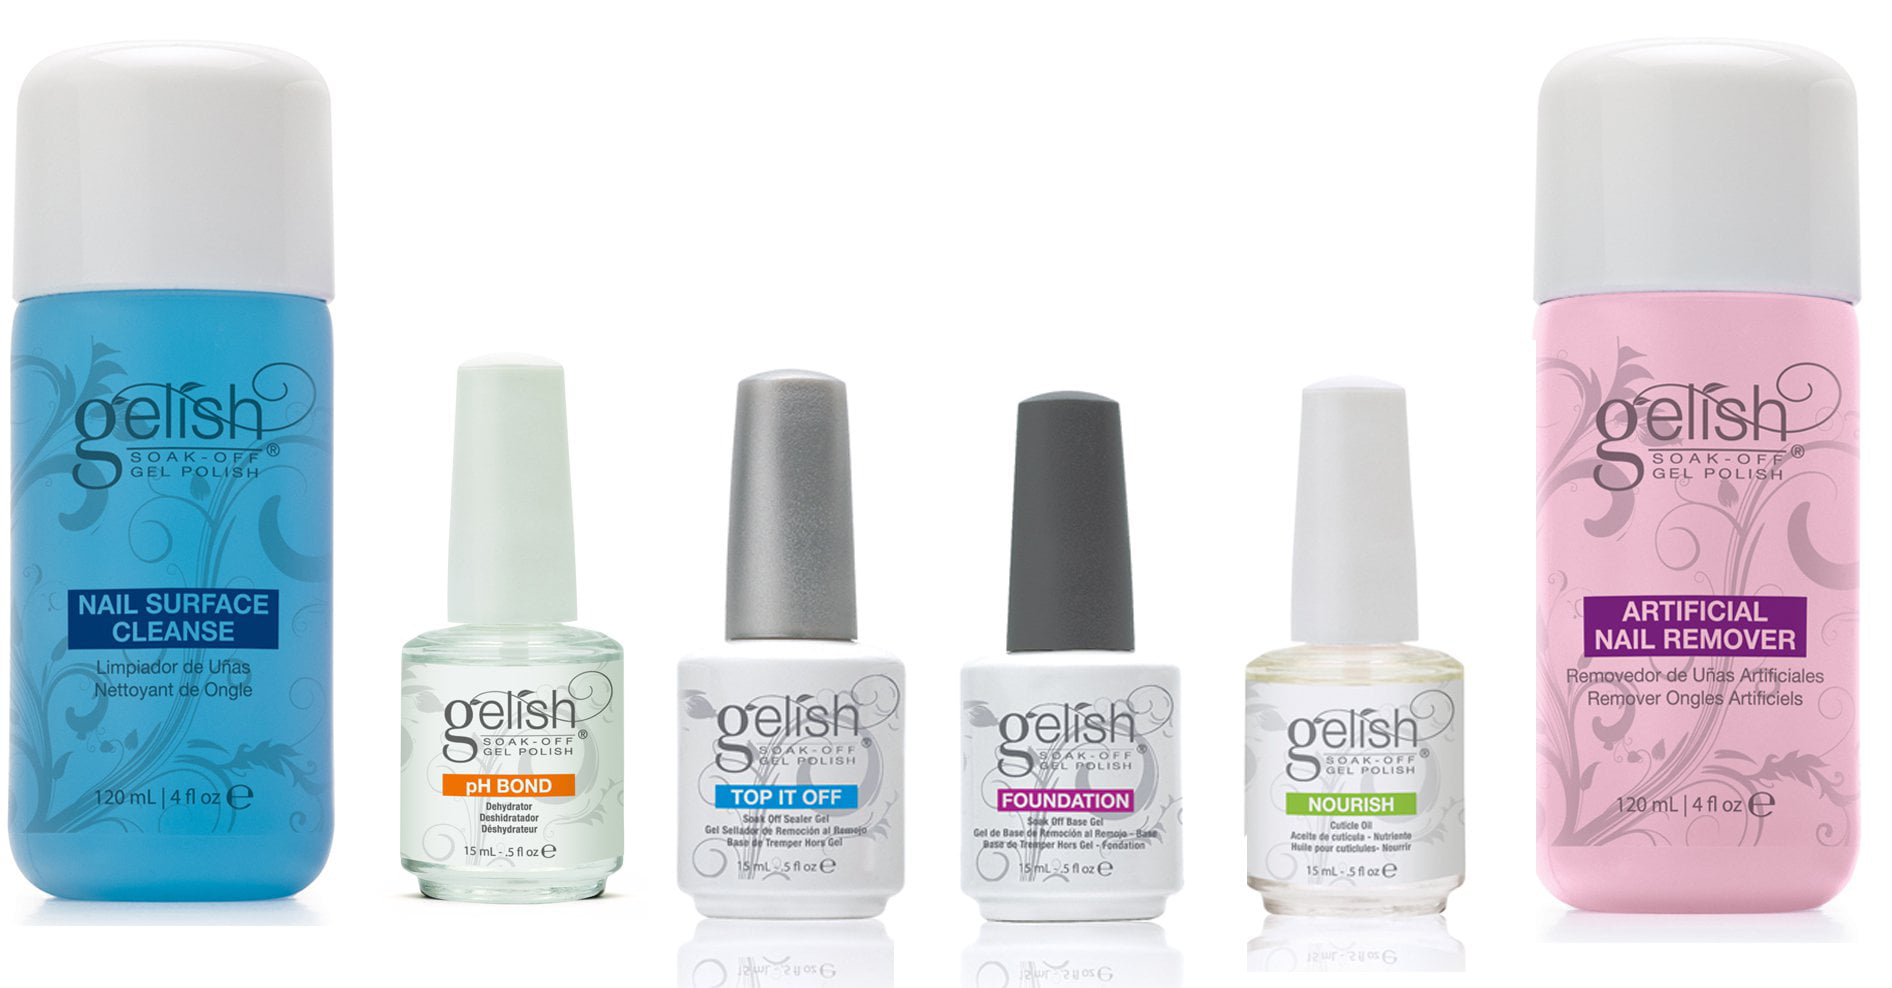 1. Gelish Color Swatches - wide 5